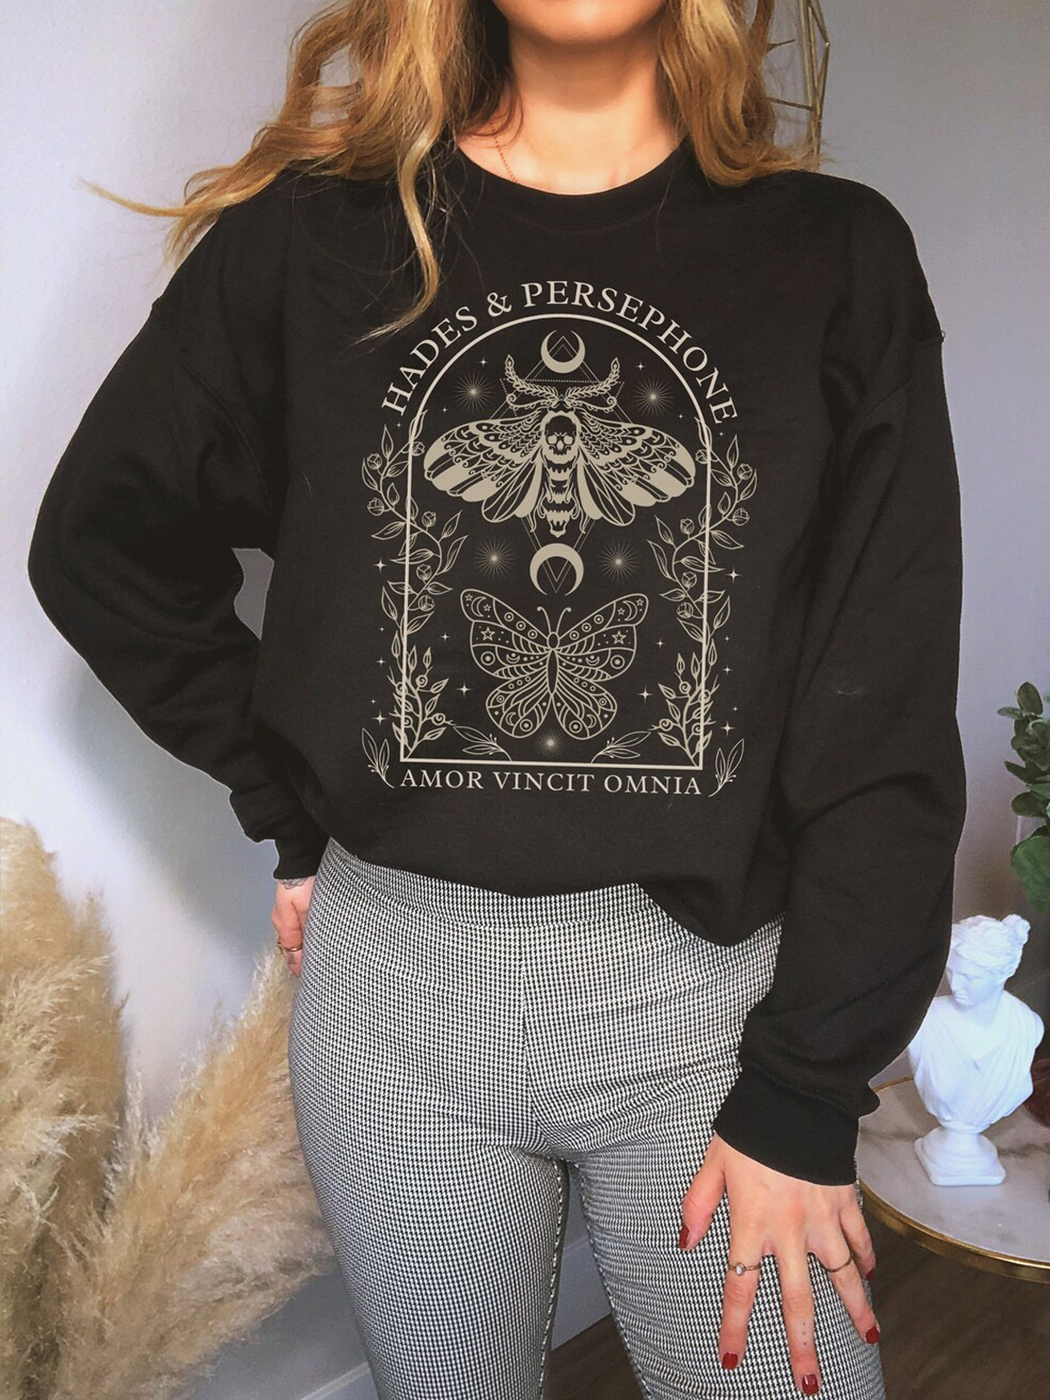 Hades And Persephone Moth And Butterfly Mythology Sweater